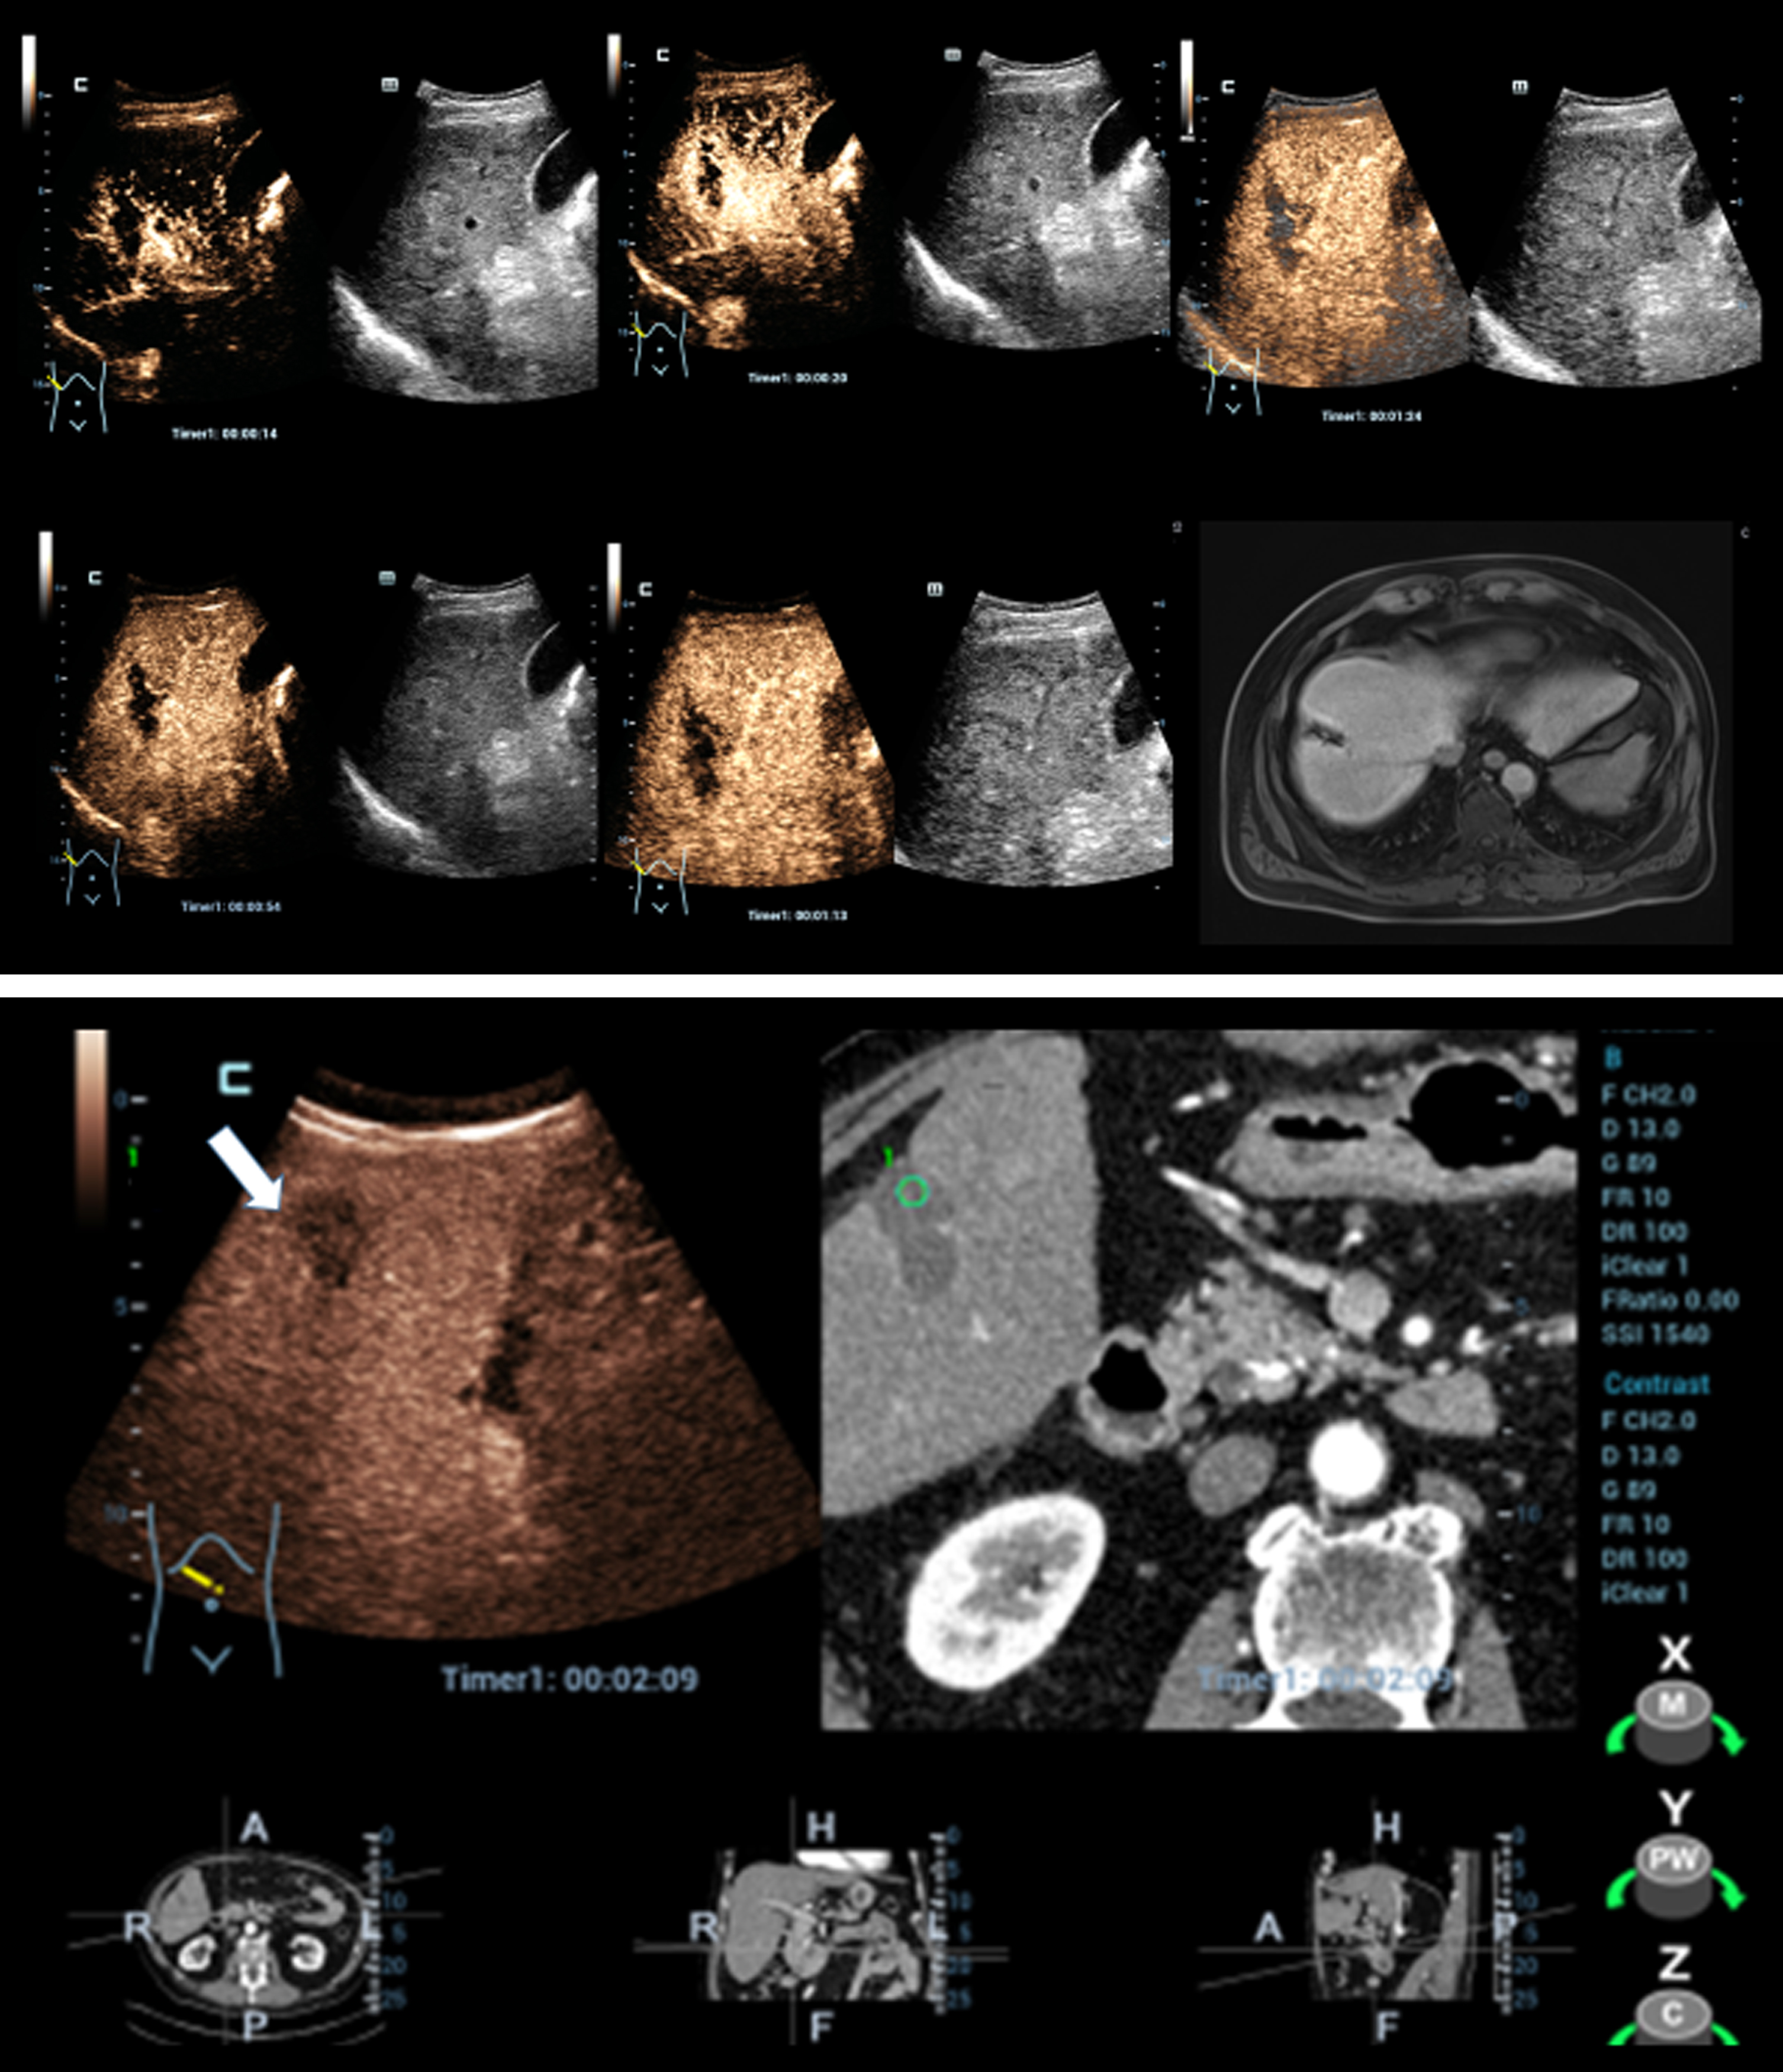 a/b: Dynamic CEUS using HiFR mode in correlation to contrast-enhanced MRI and fusion CEUS with contrast-enhanced CT to control successful microwave ablation (MWA) of a liver tumor with complete devascularization.